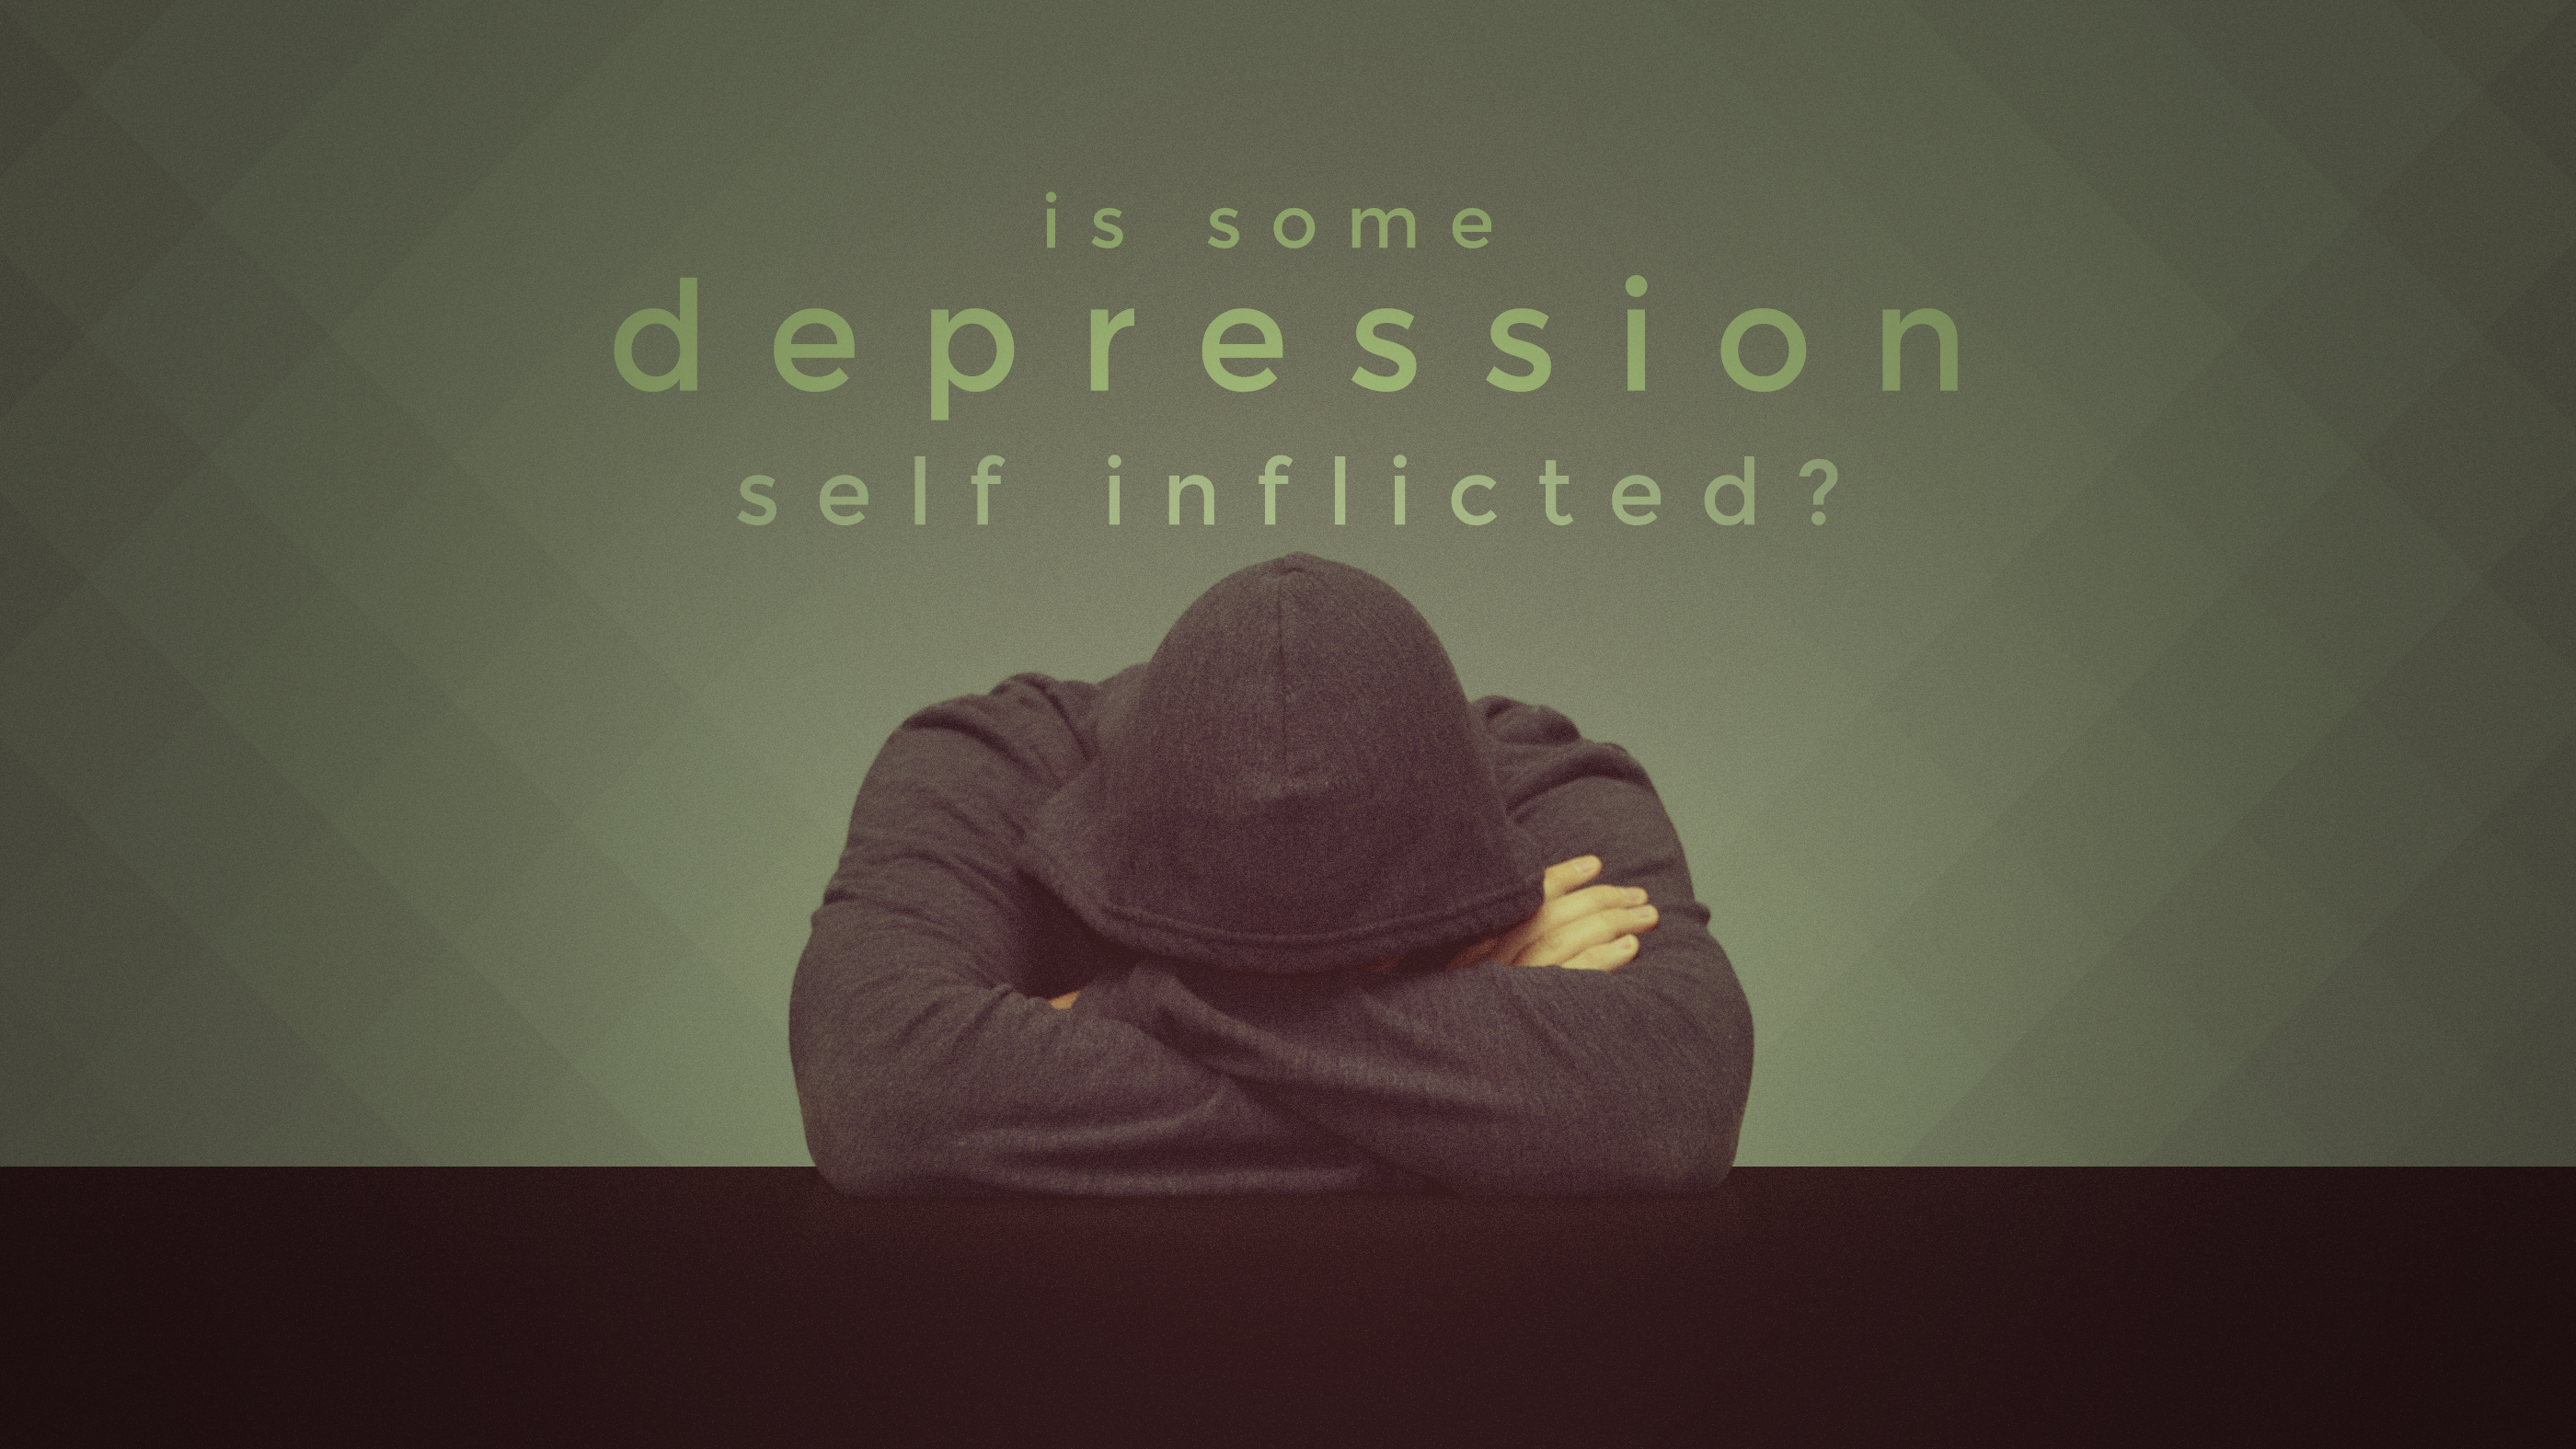 3-17-14 “Is Some Depression Self Inflicted?” – Pastor Shane Idleman